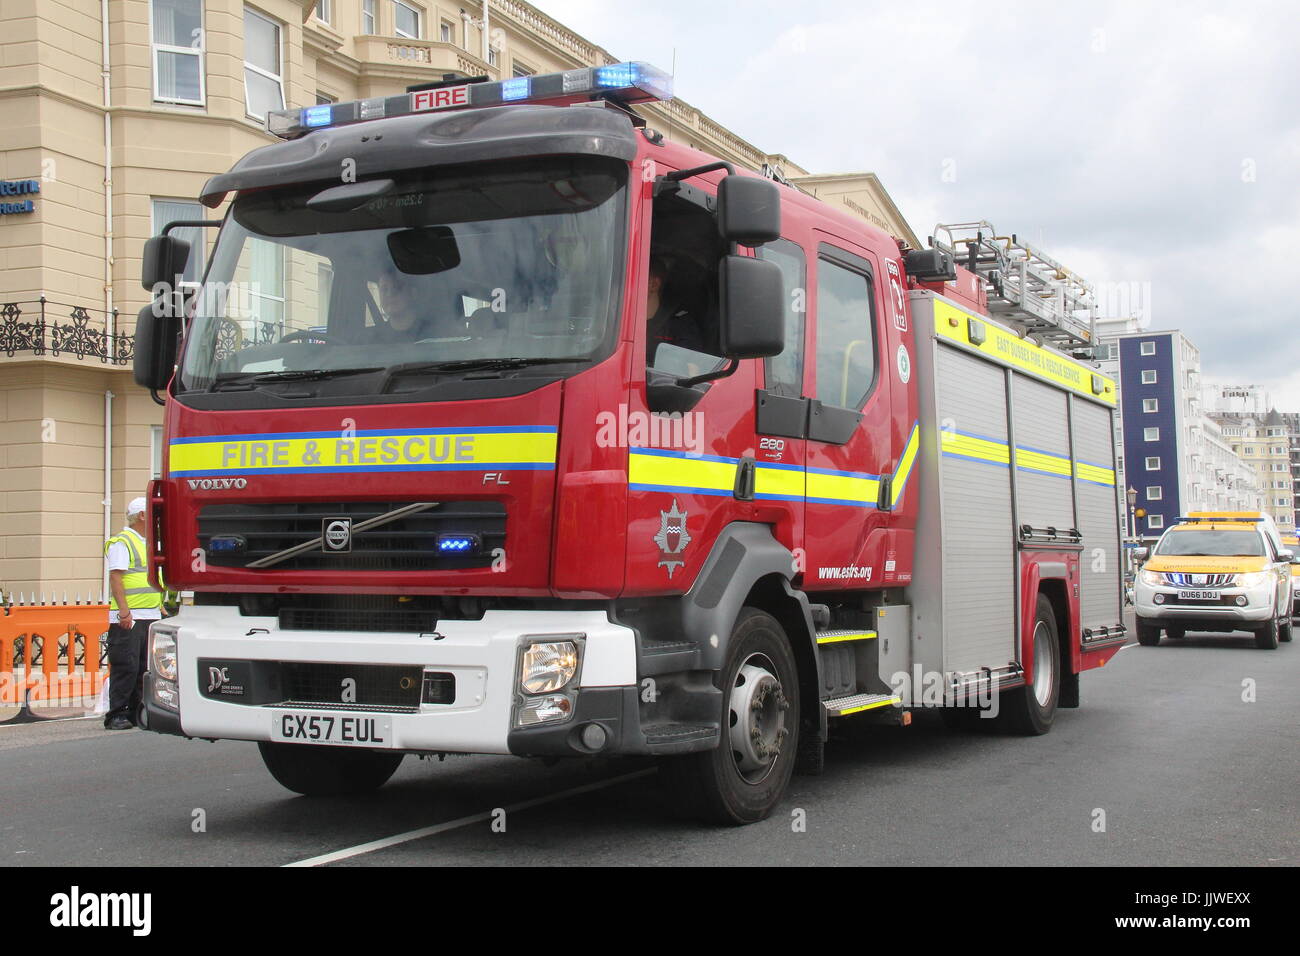 EAST SUSSEX FIRE & RESCUE VOLVO FIRE APPLIANCE WITH BLUE LIGHTS FLASHING Stock Photo